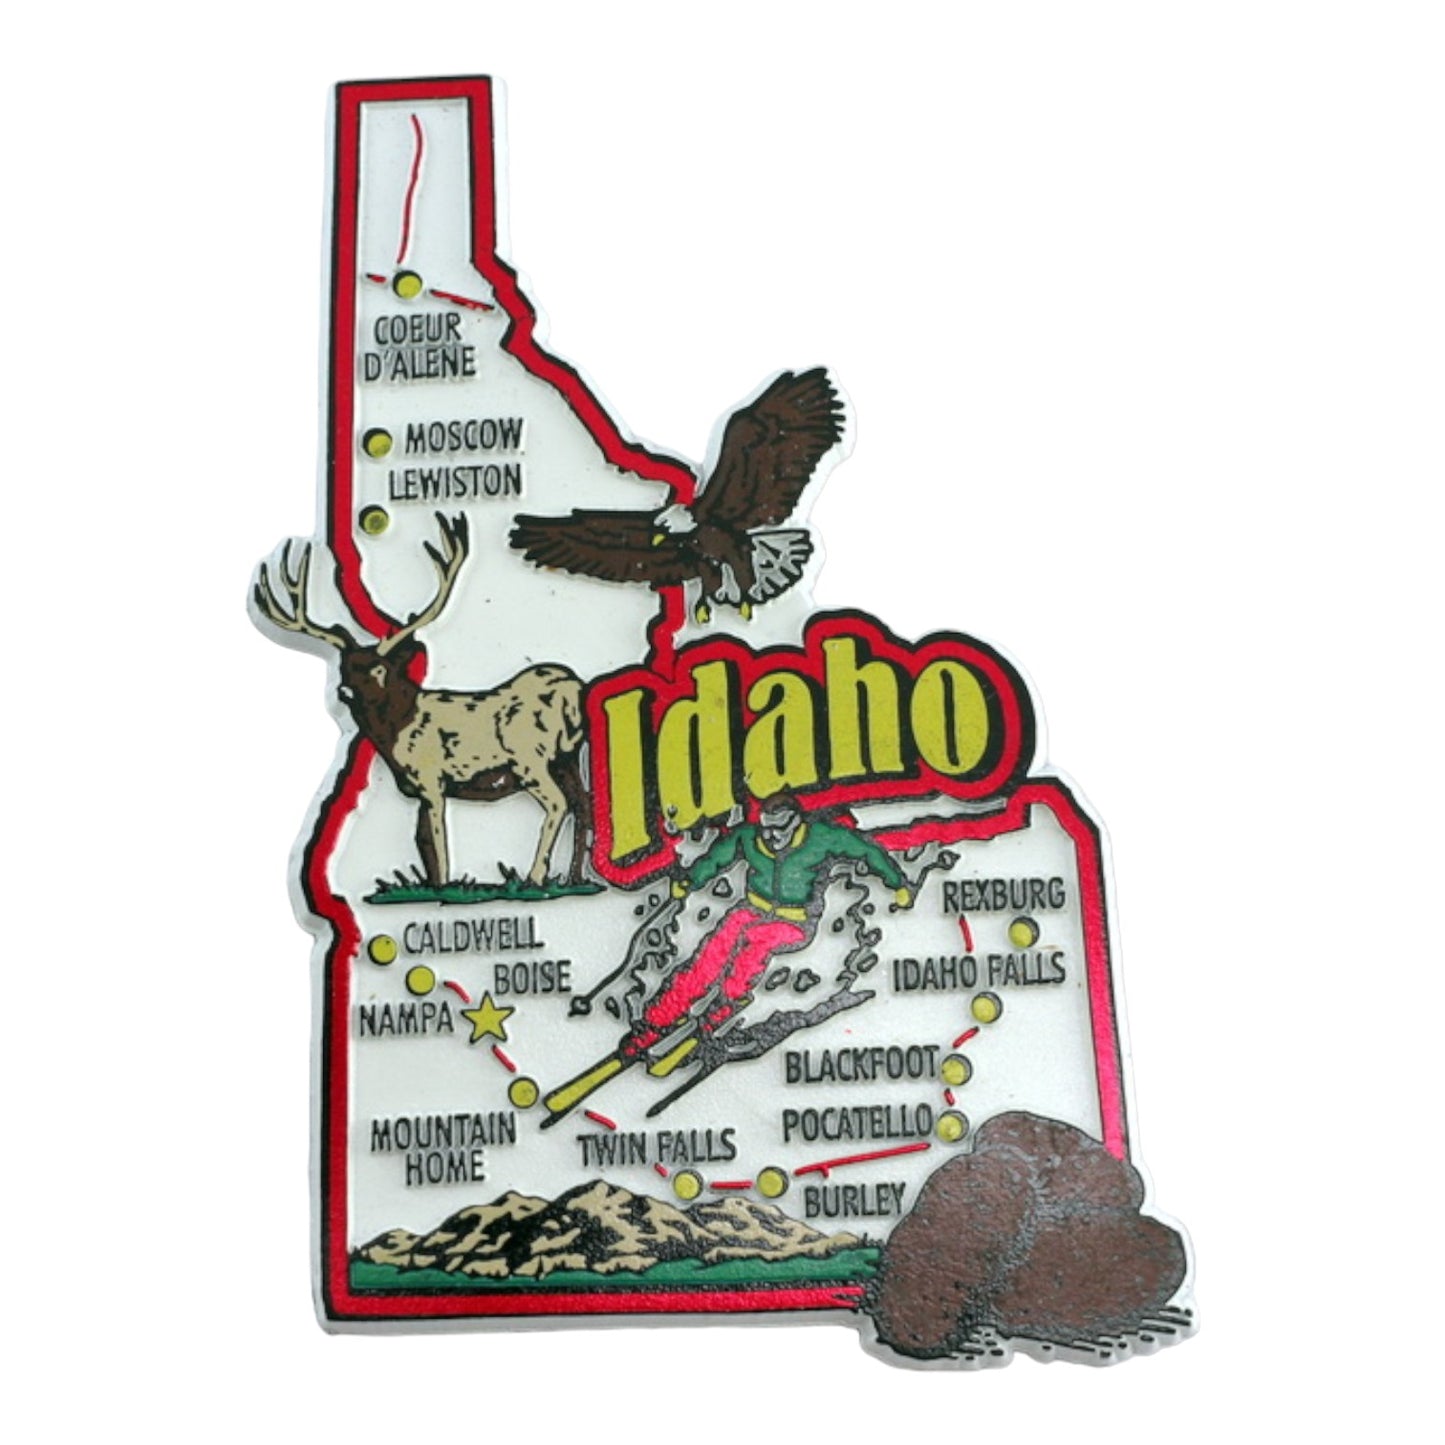 Idaho State Map and Landmarks Collage Fridge Collectible Souvenir Magnet